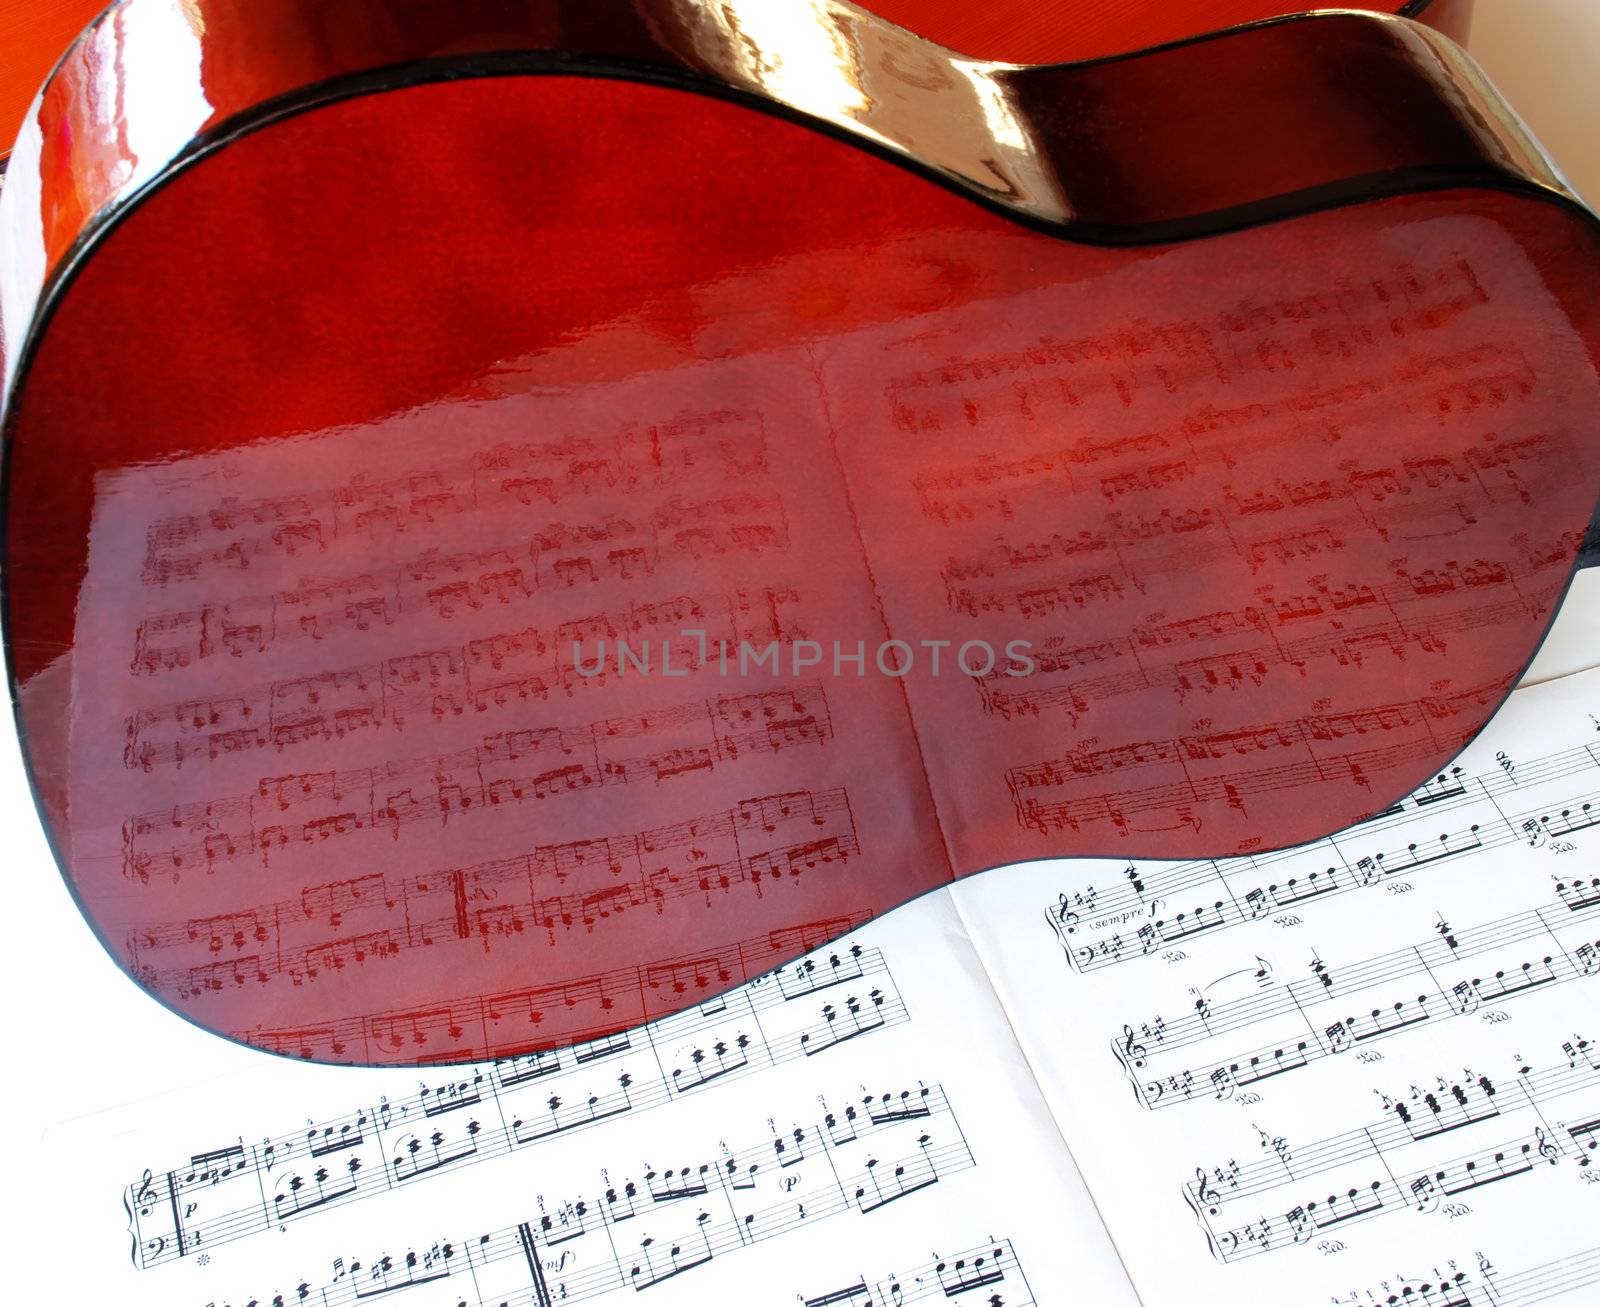 Shining acoustical guitar over music book with notes